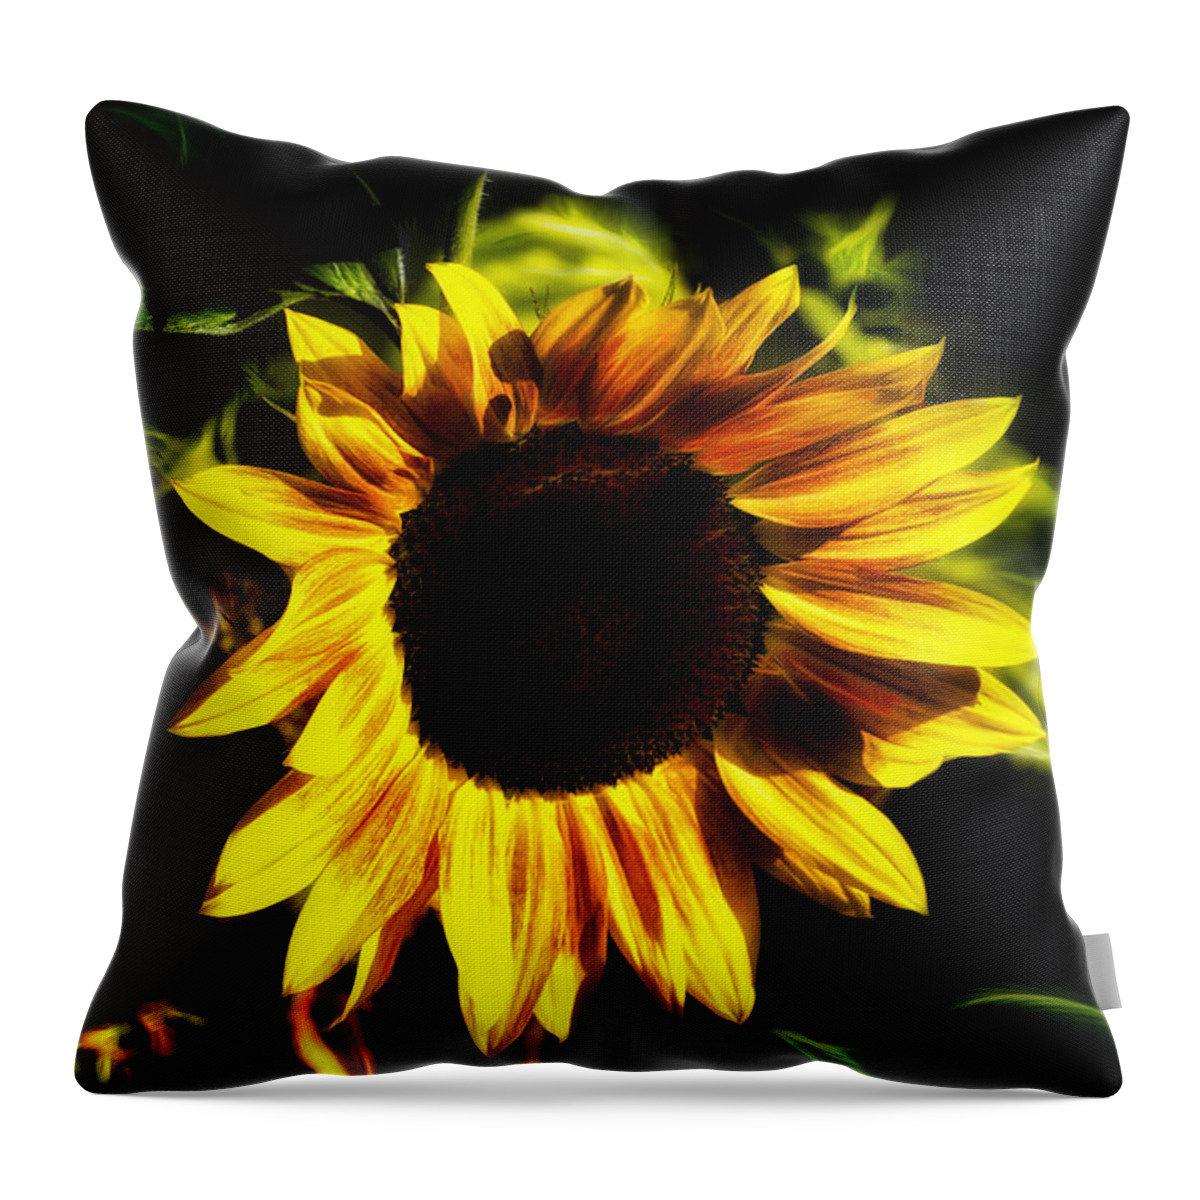 Sunflower Throw Pillow featuring the photograph Twilight Sunflower by Bill and Linda Tiepelman